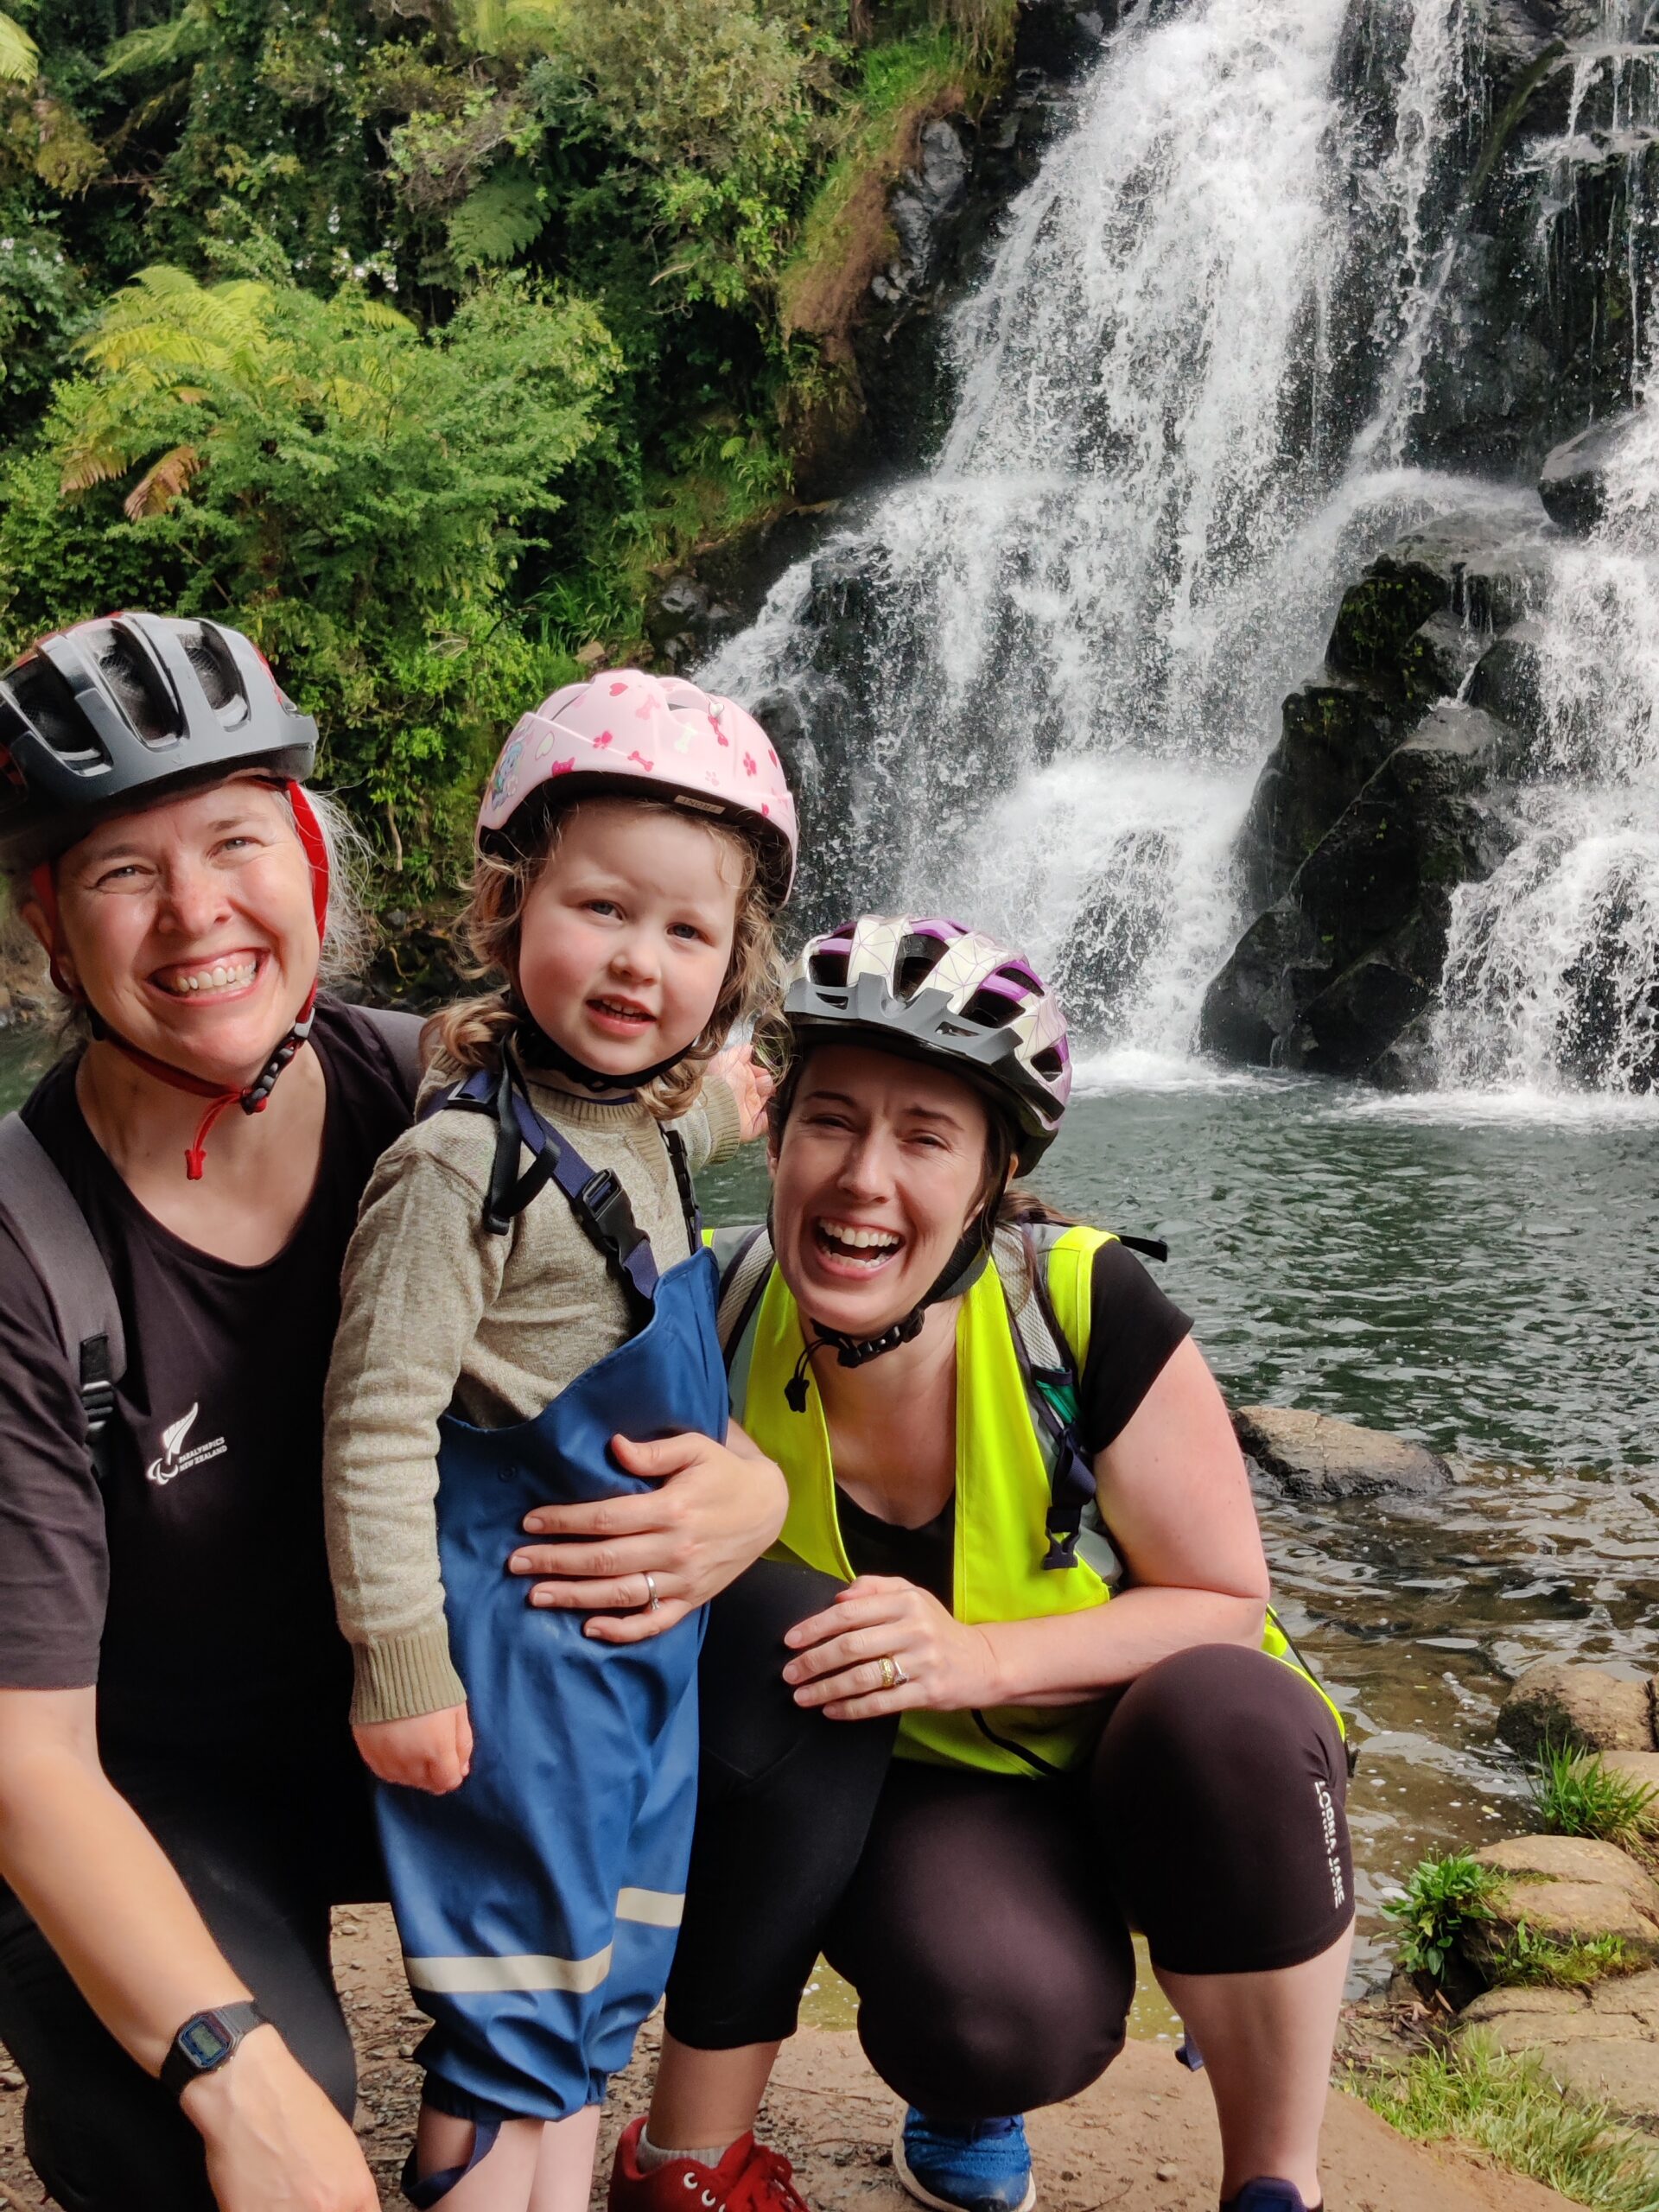 A family with two mums and a toddler smile in front of a waterfall. They are all wearing bike helmets.